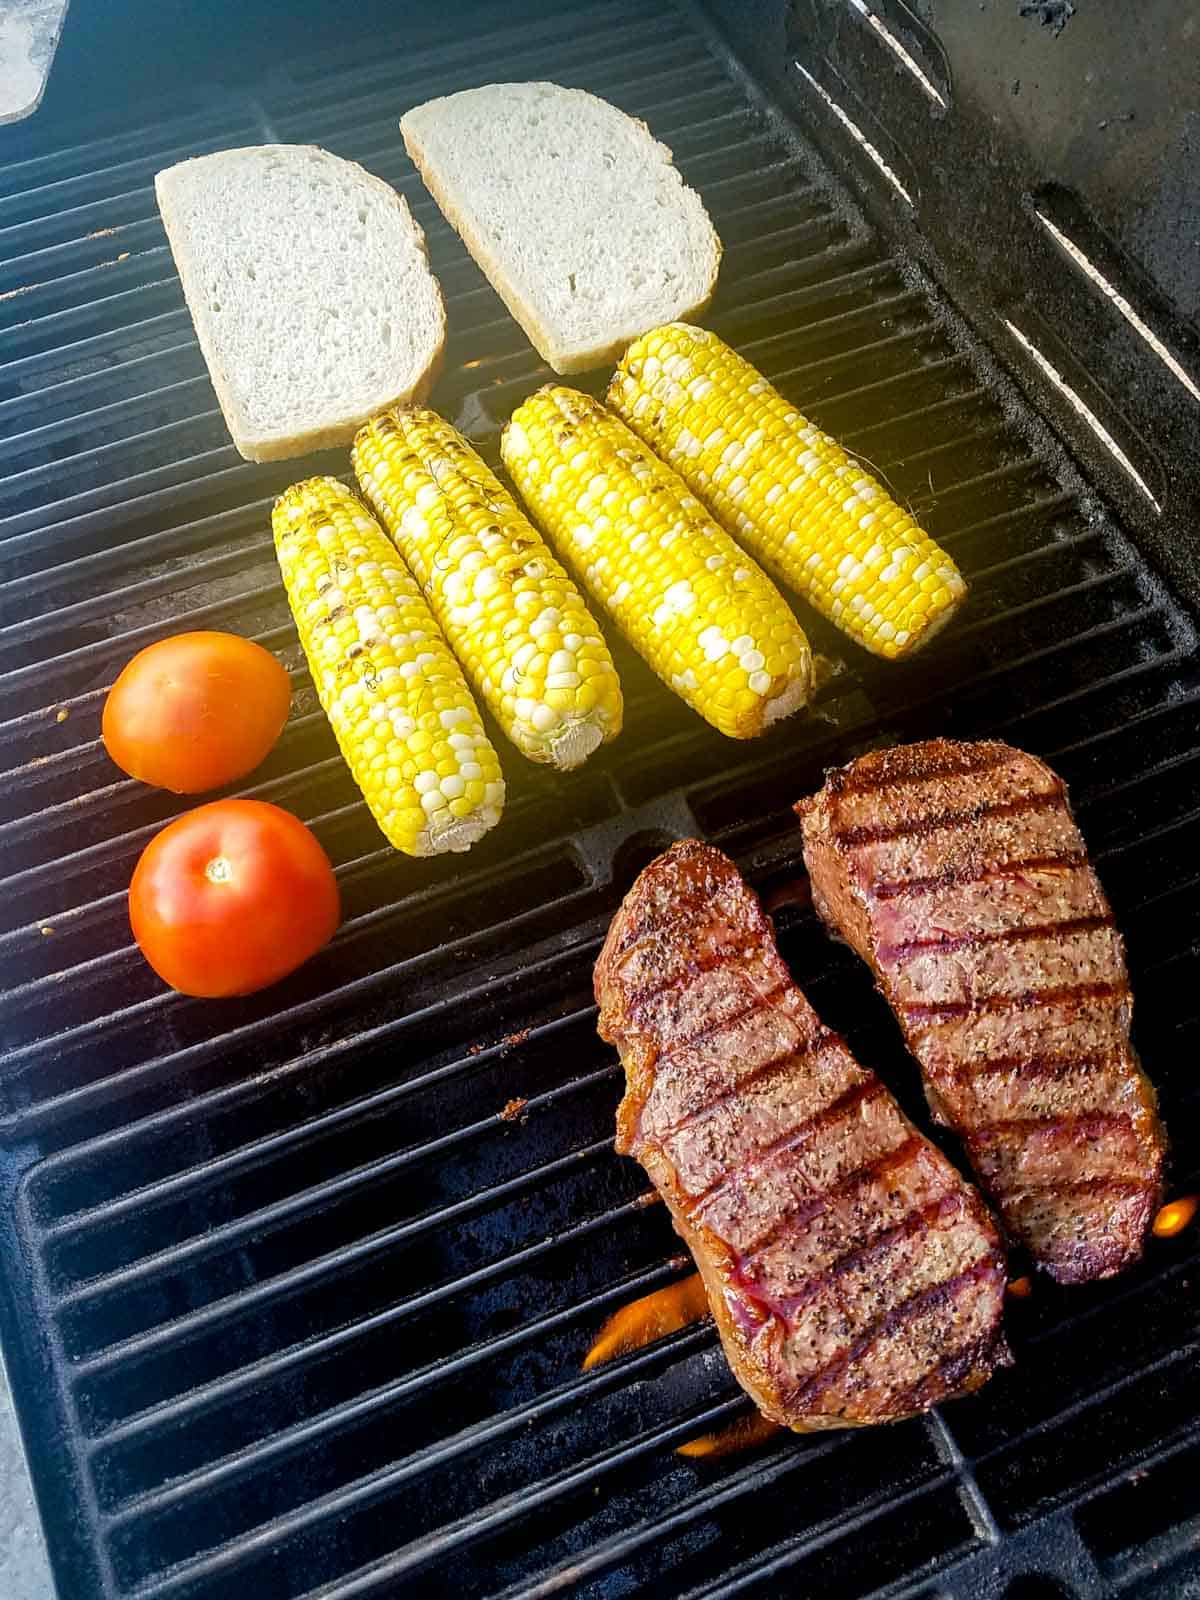 cooked steaks on a grill with tomatoes, corn and bread.